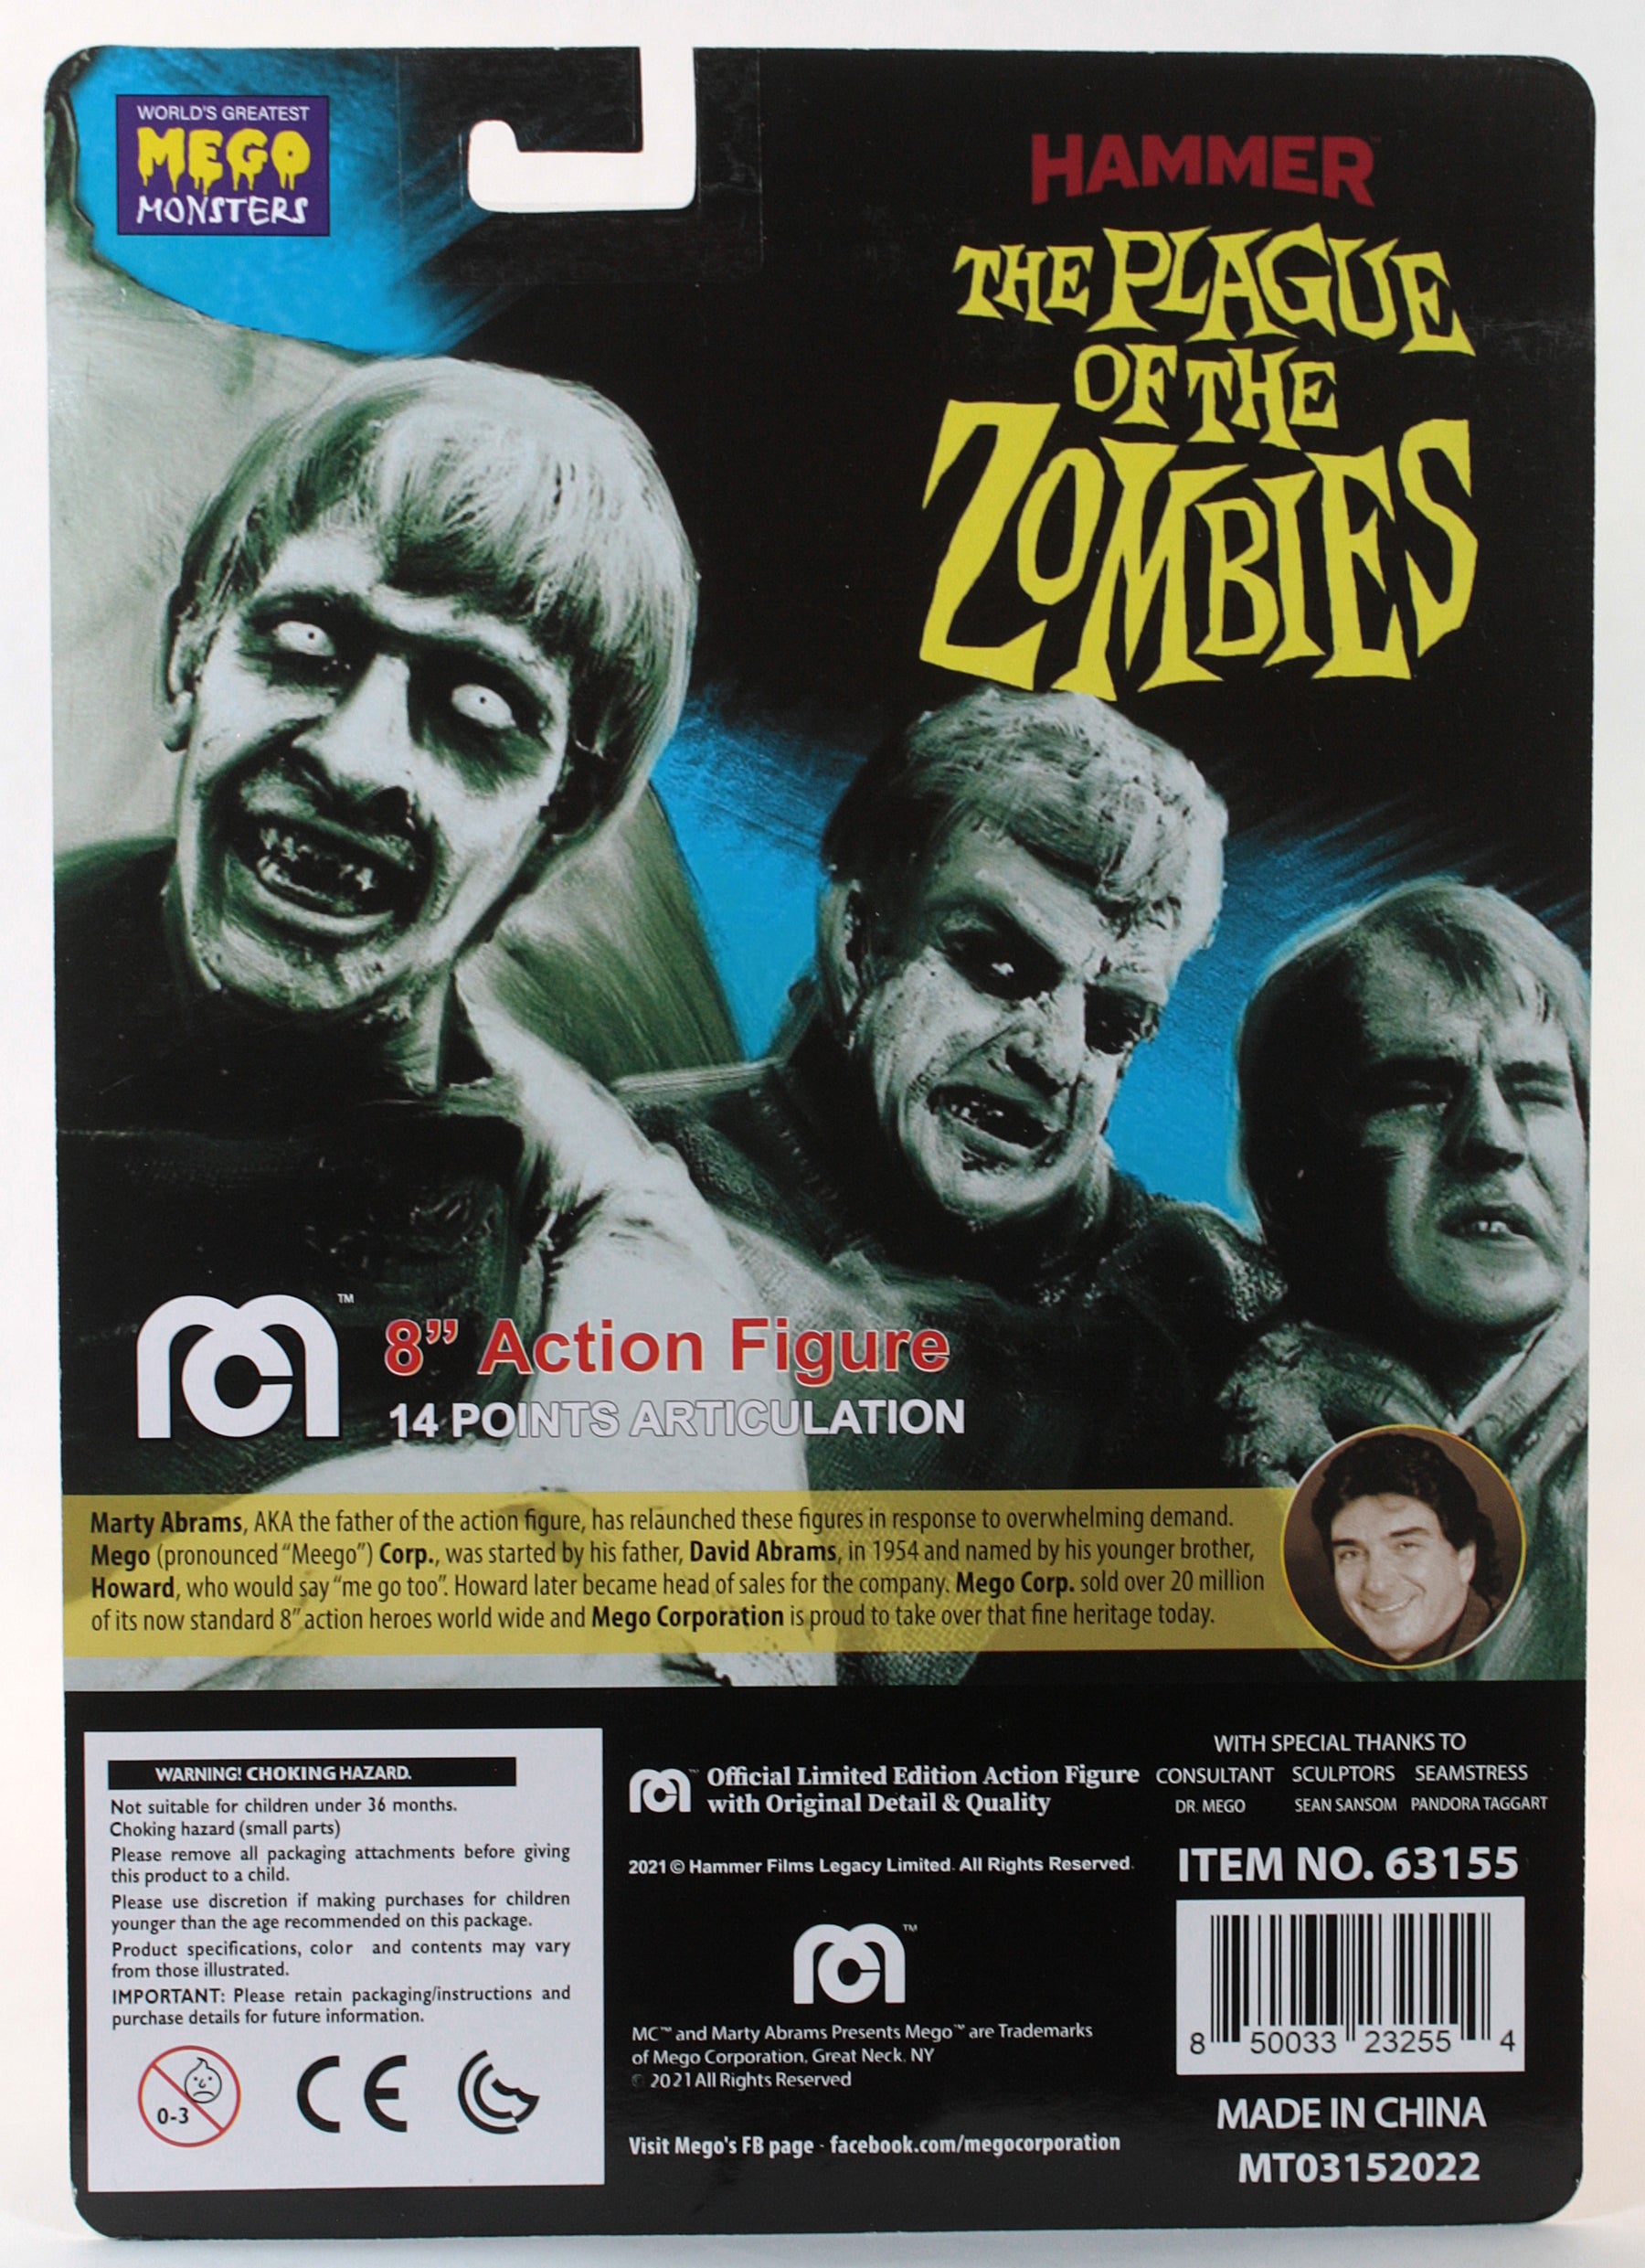 Mego Horror Wave 15 - Hammer Plague of the Zombies (Variant) 8" Action Figure